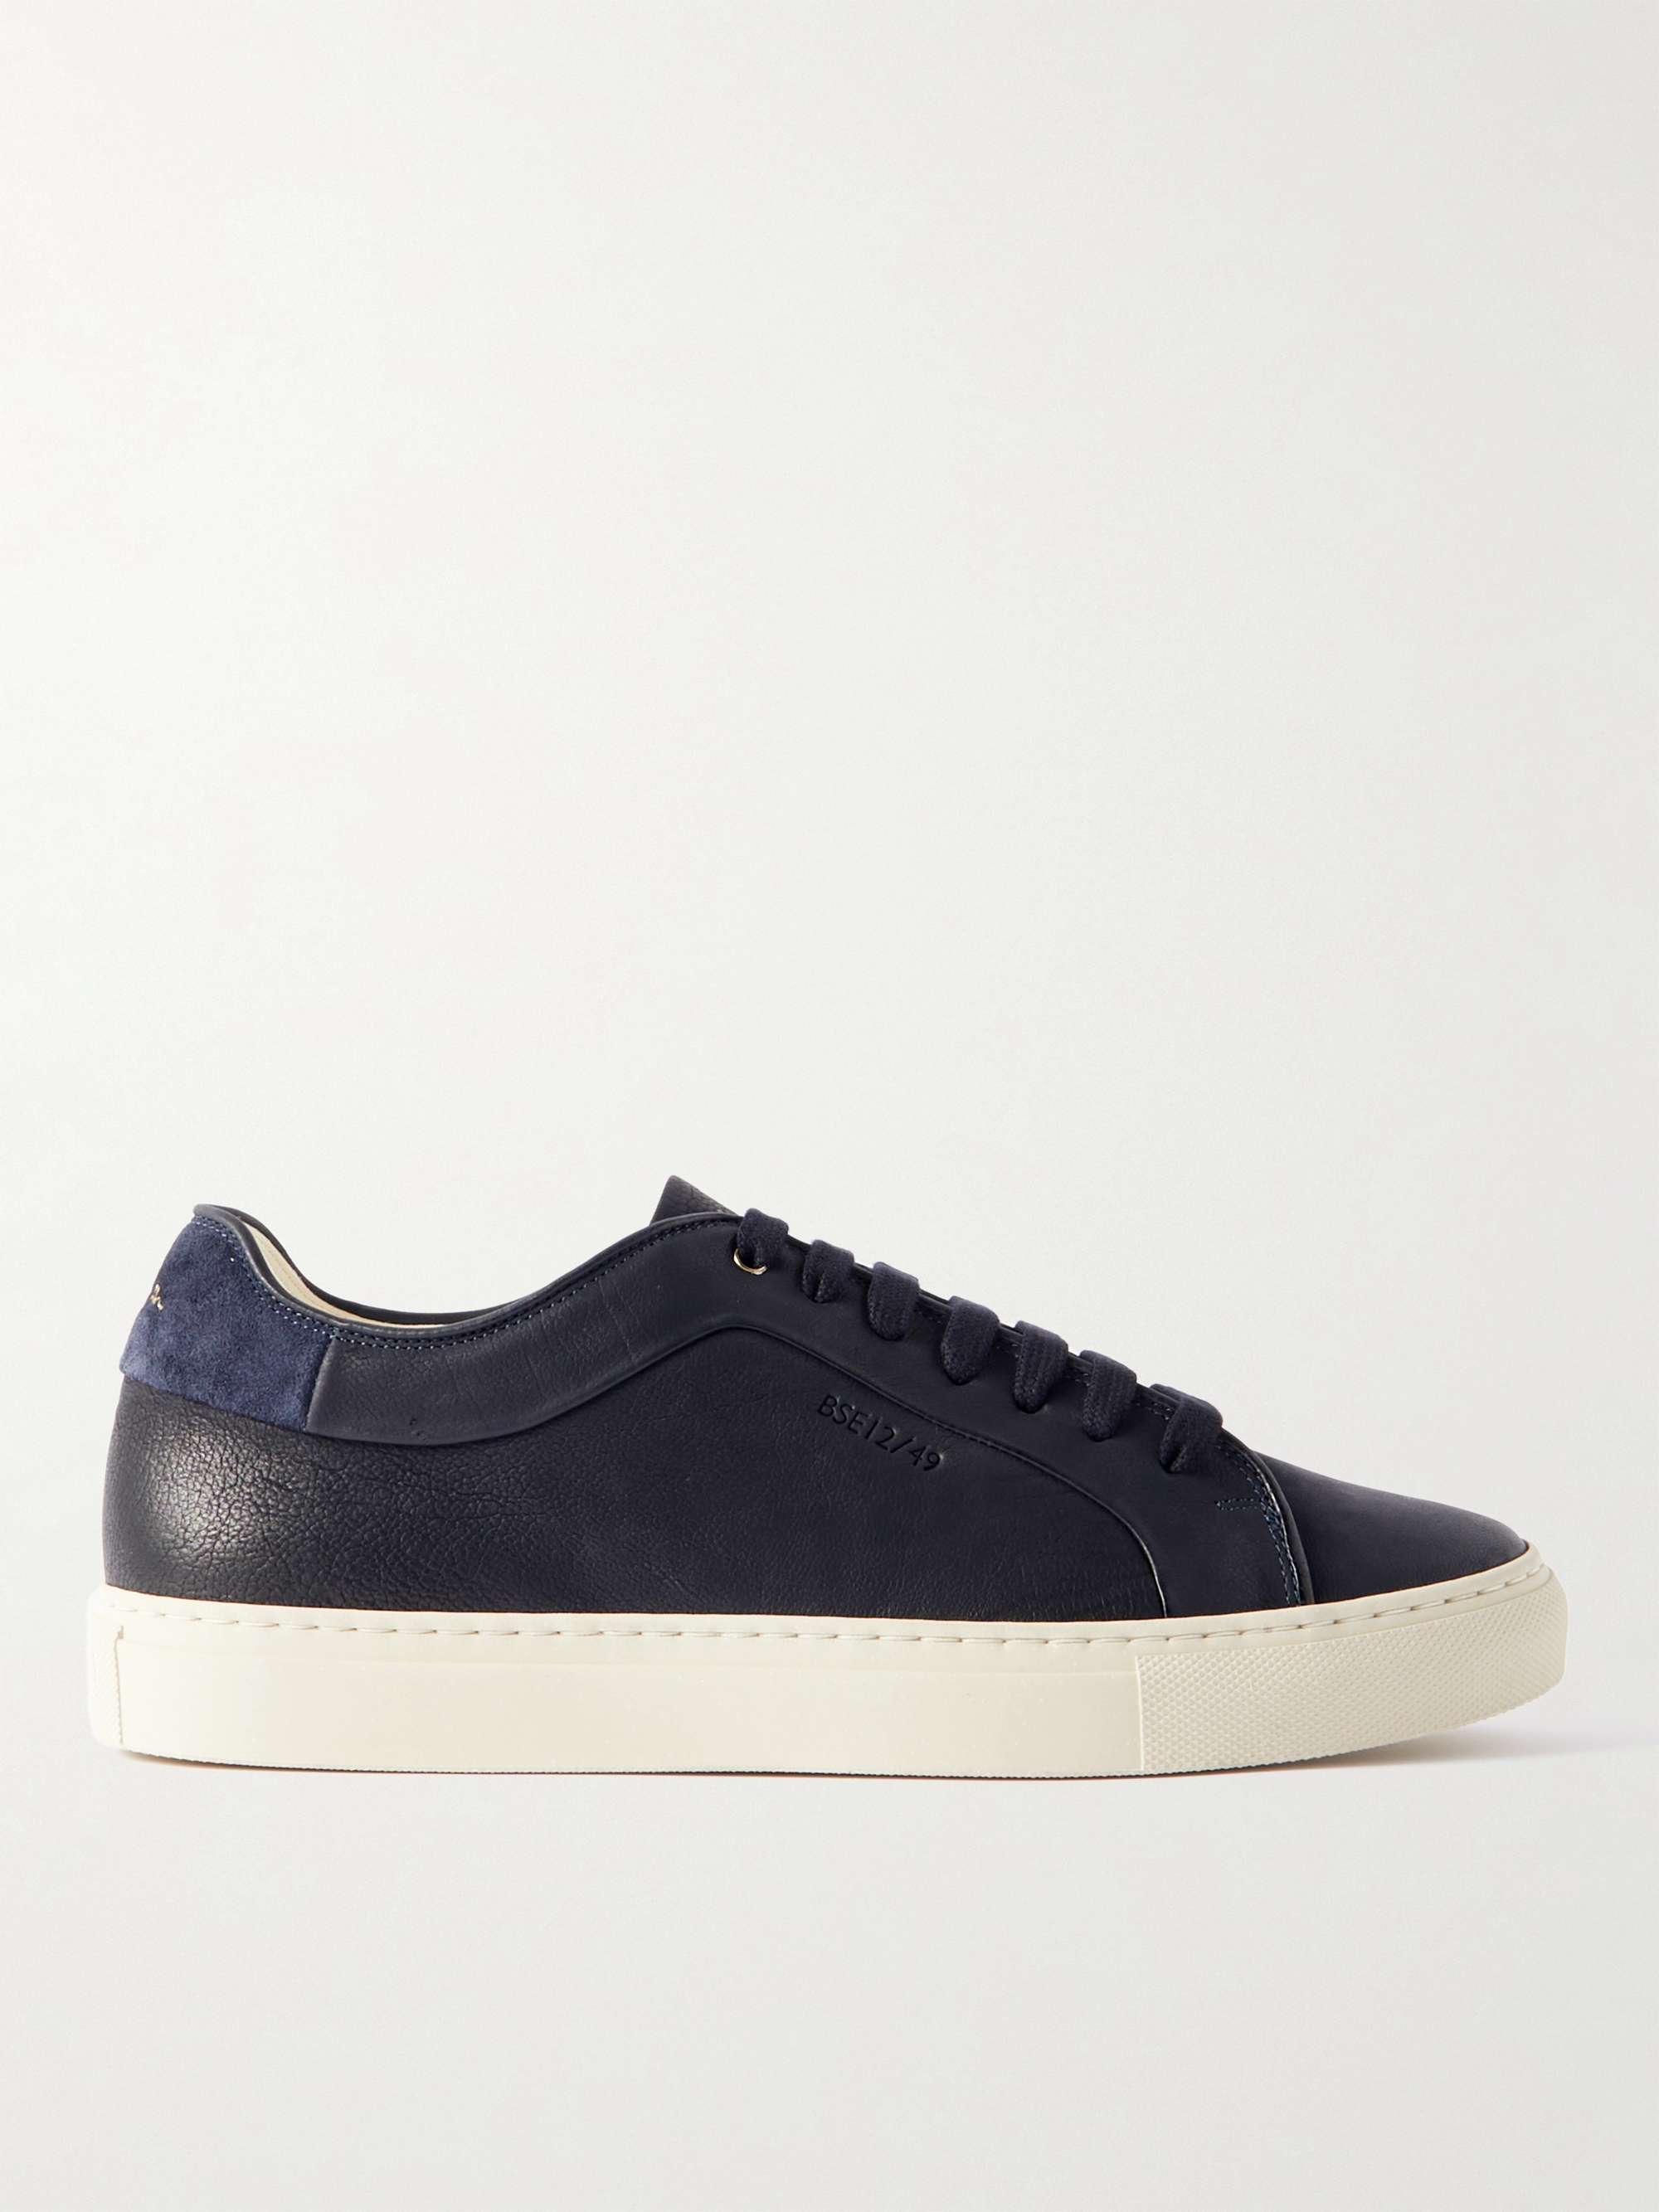 Resonate counter Butcher Navy Basso Suede-Trimmed ECO Leather Sneakers | PAUL SMITH | MR PORTER